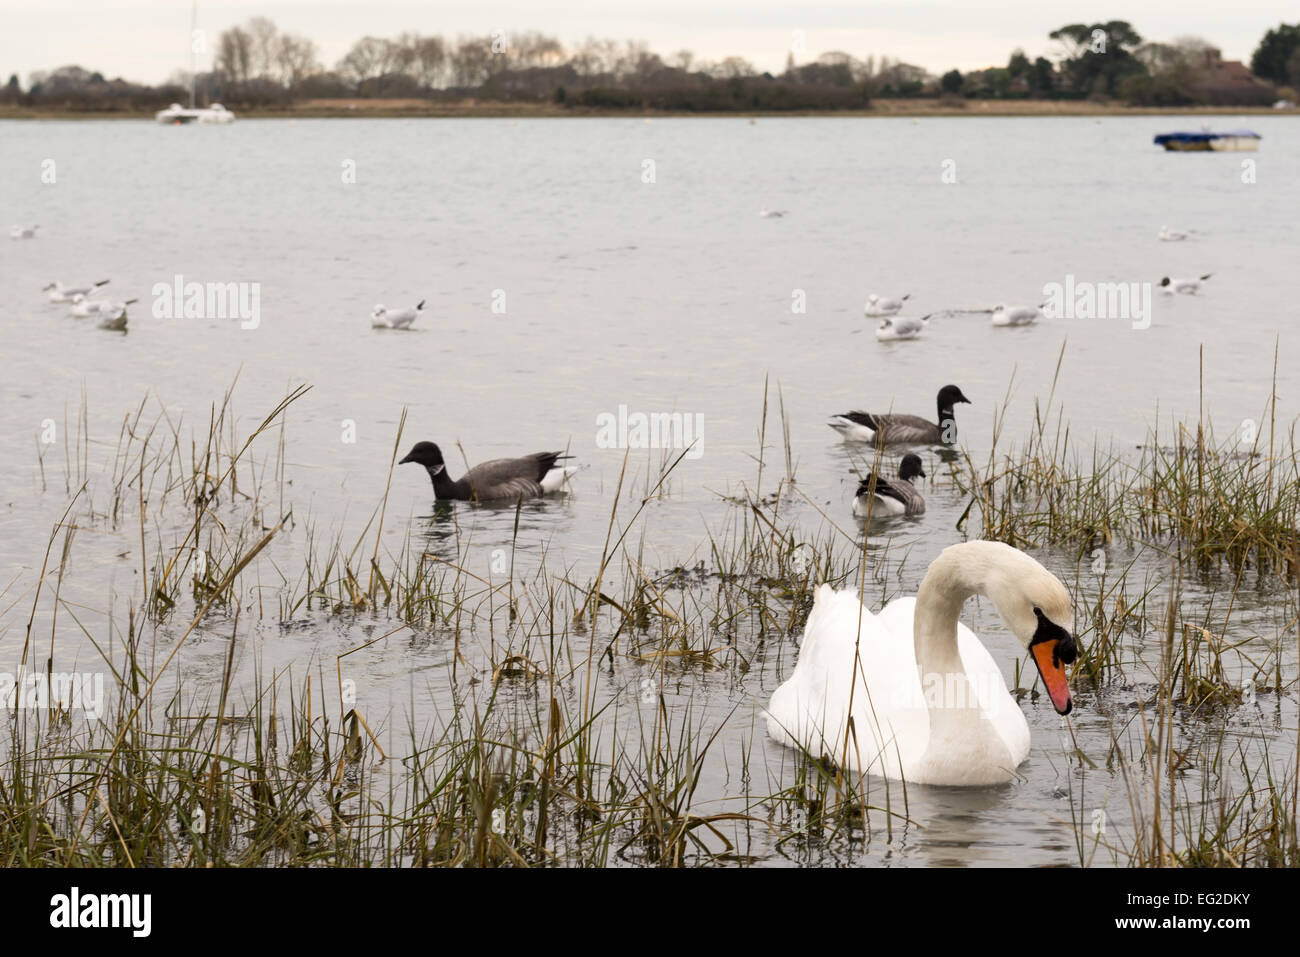 Swan and other waterbirds in an estuary Stock Photo